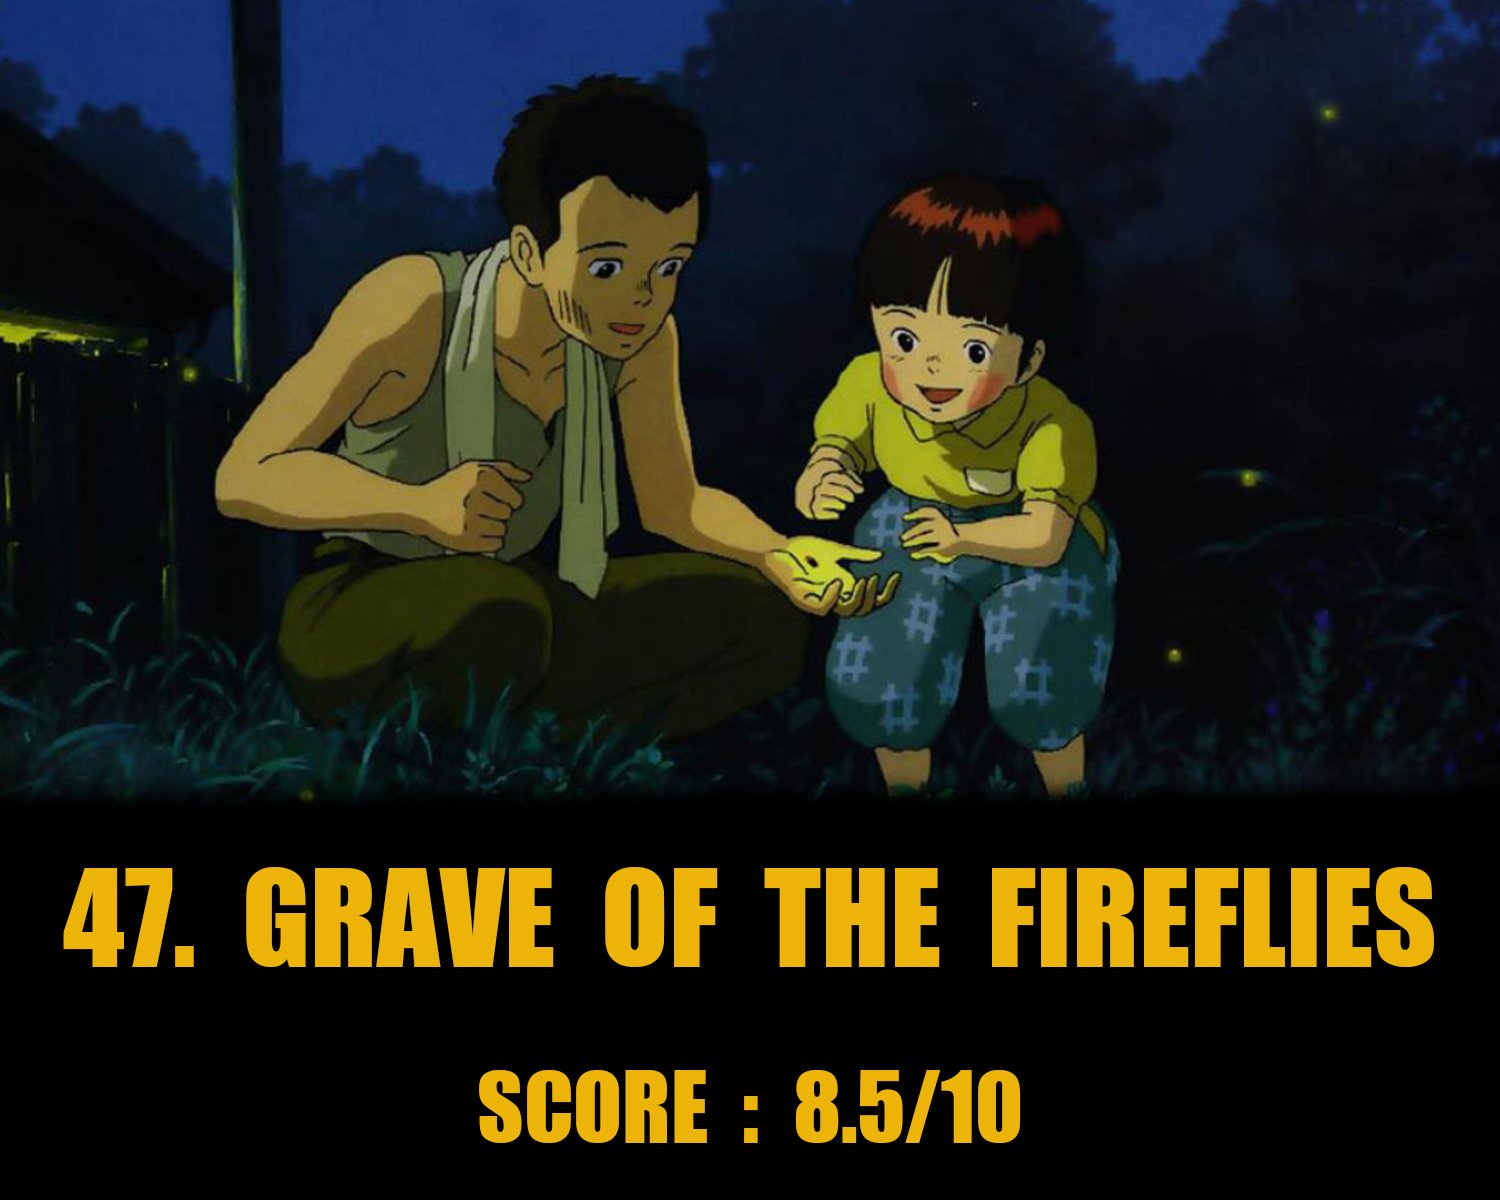 Grave of the Fireflies(1988)